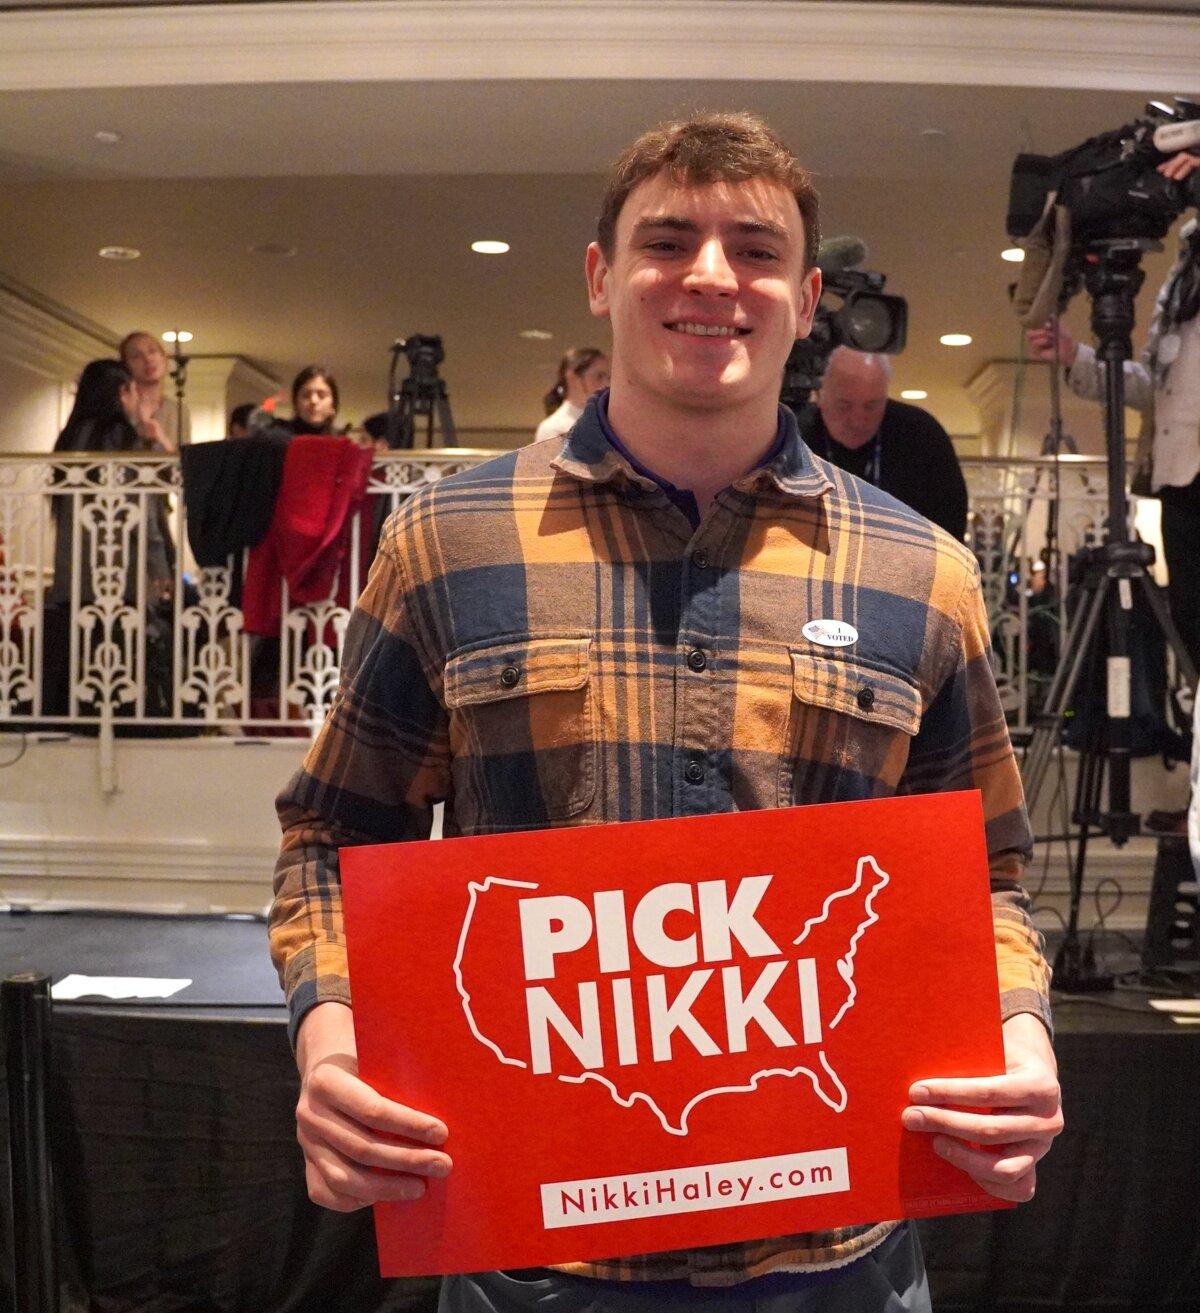 Jack Thompkins, a first-time D.C. voter, at a campaign event of Republican presidential candidate Nikki Haley in Washington on March 1, 2024. (Terri Wu/The Epoch Times)